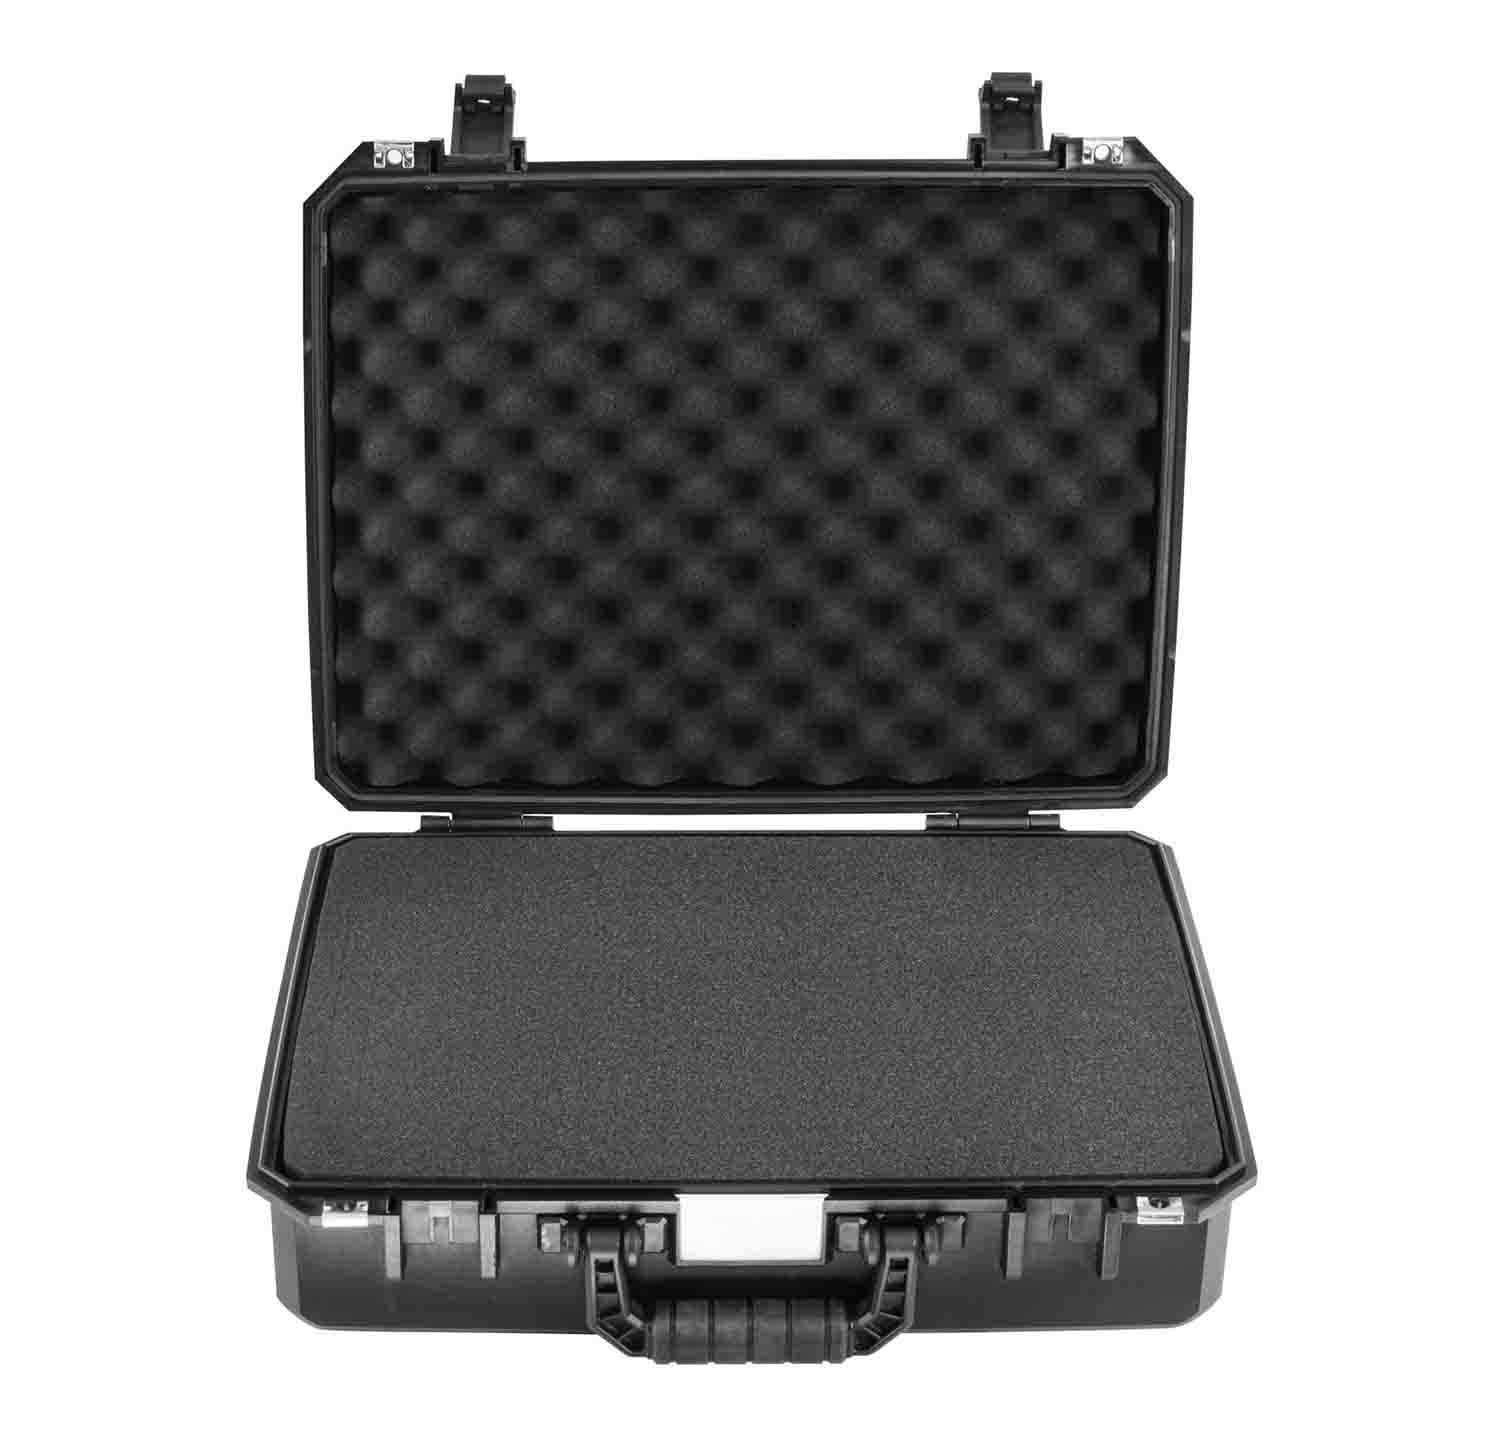 Odyssey VU171205 Bottom Interior with Pluck Foams Injection-Molded Utility Case - Hollywood DJ